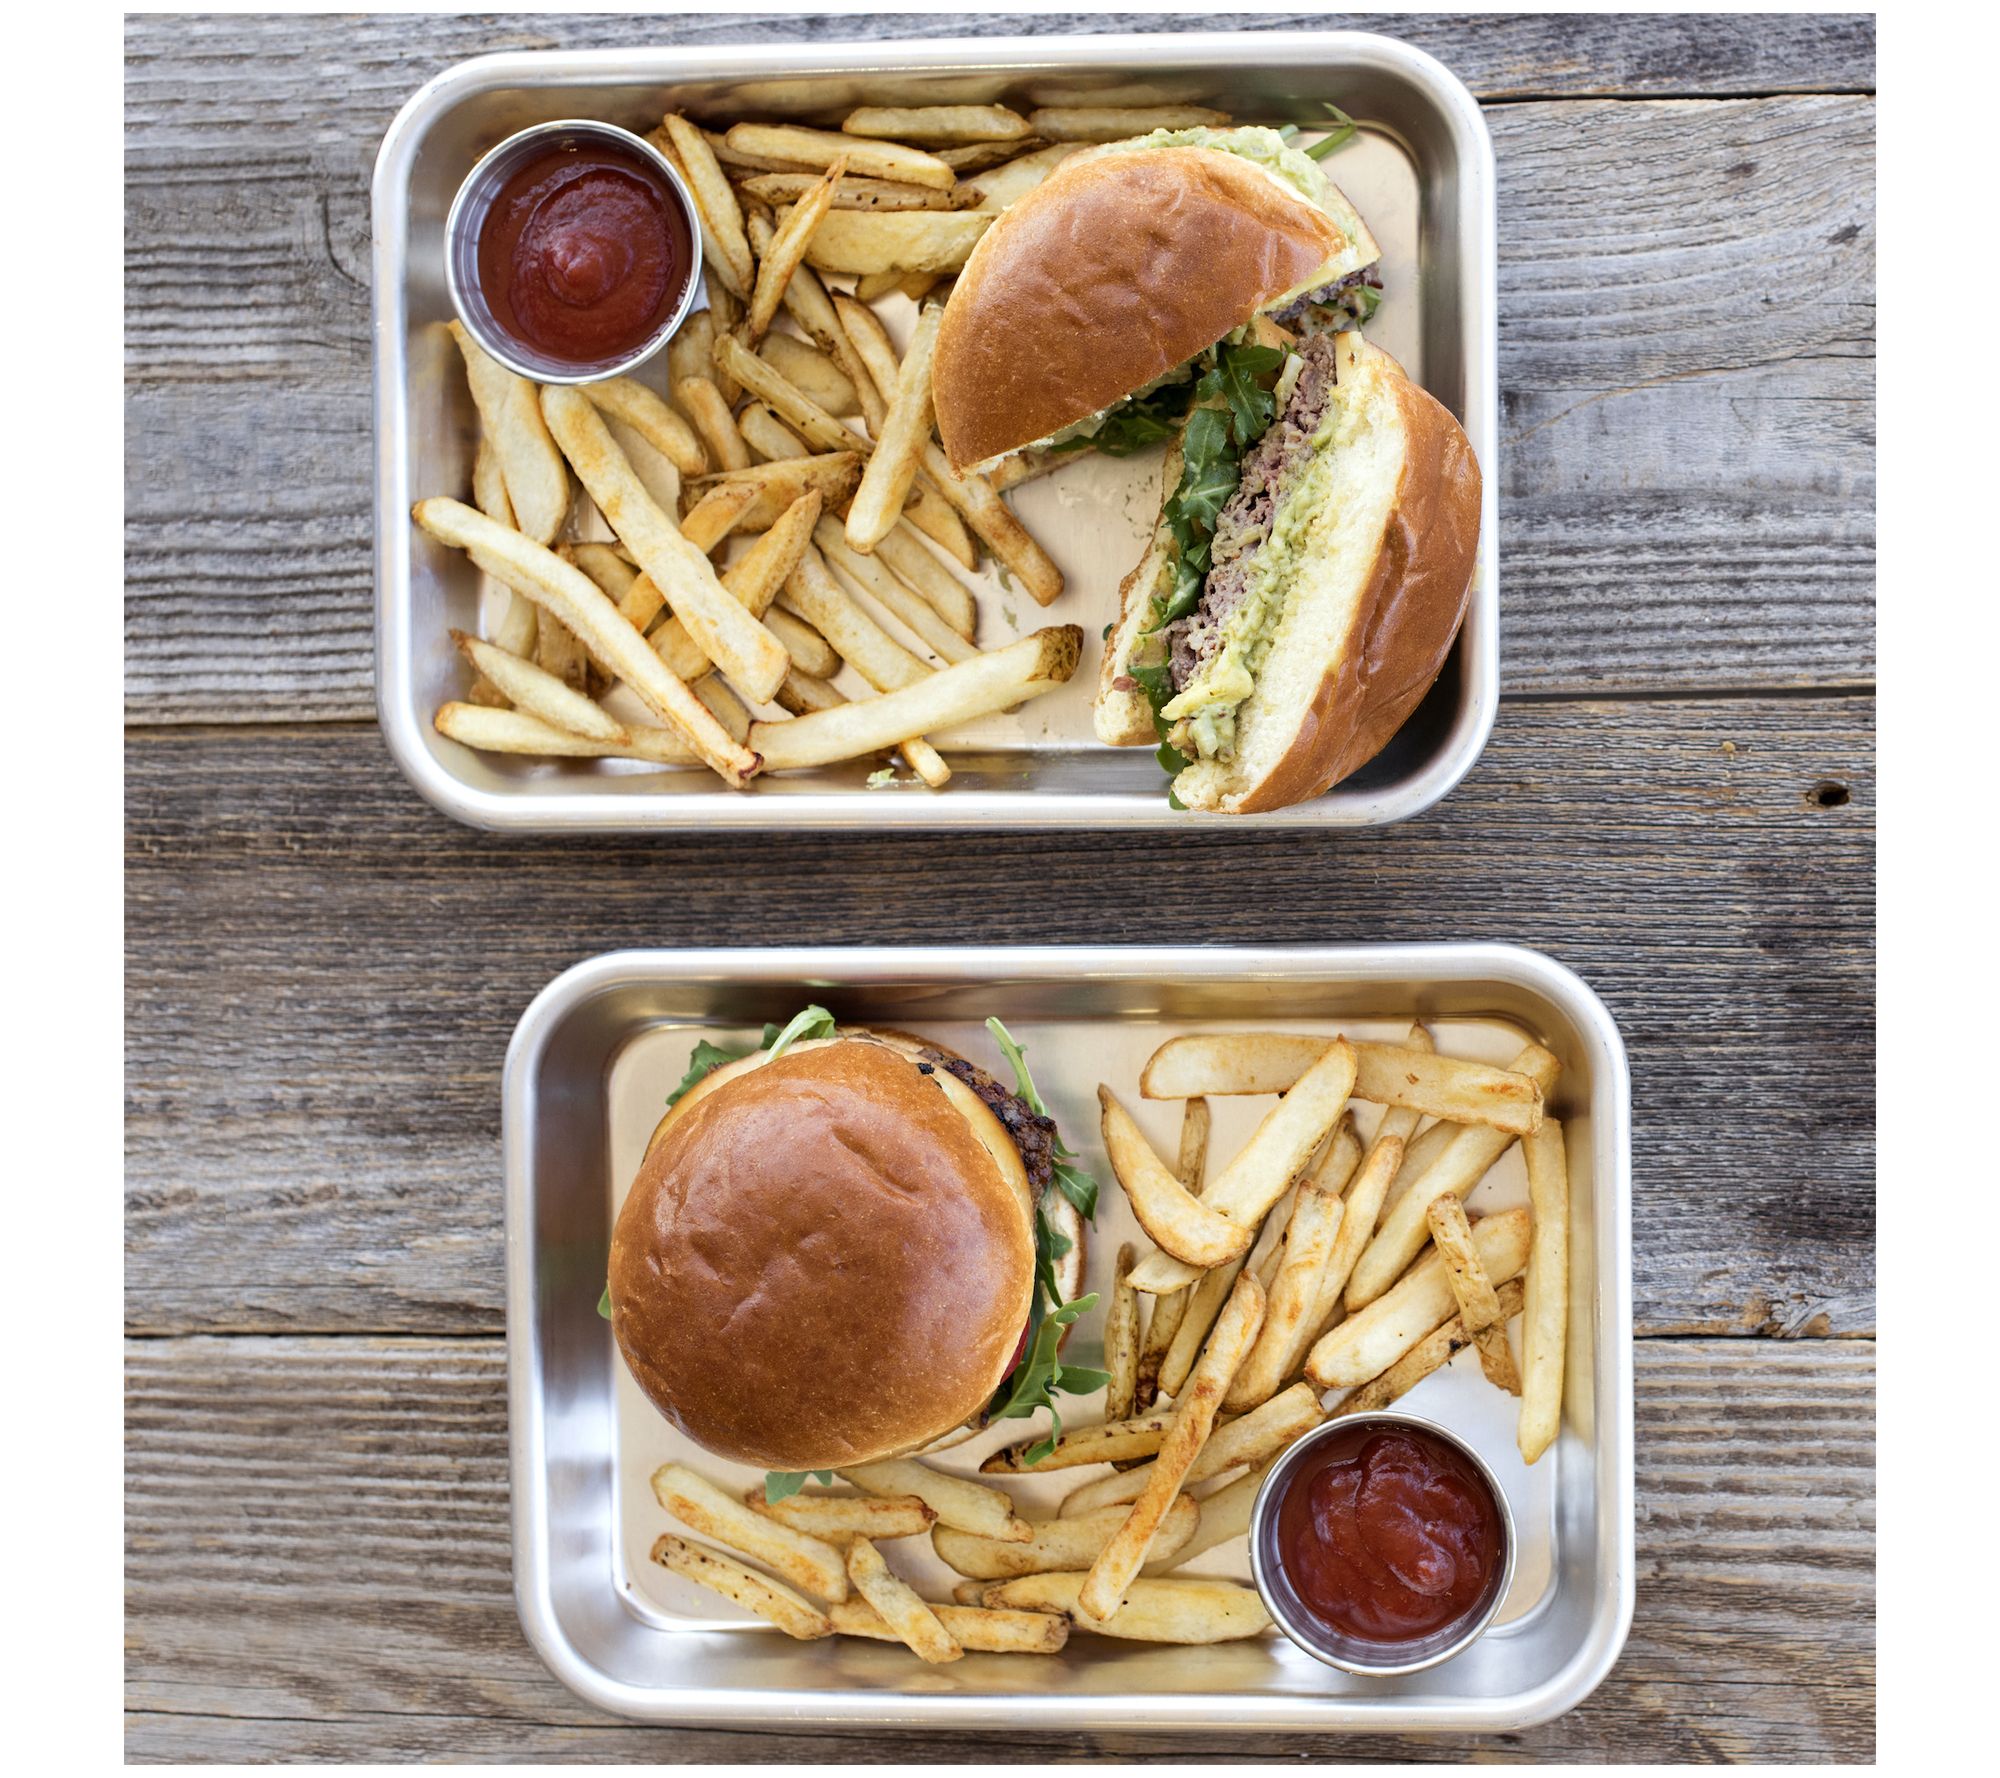 Nordic Ware 2 Pack Burger Serving Trays